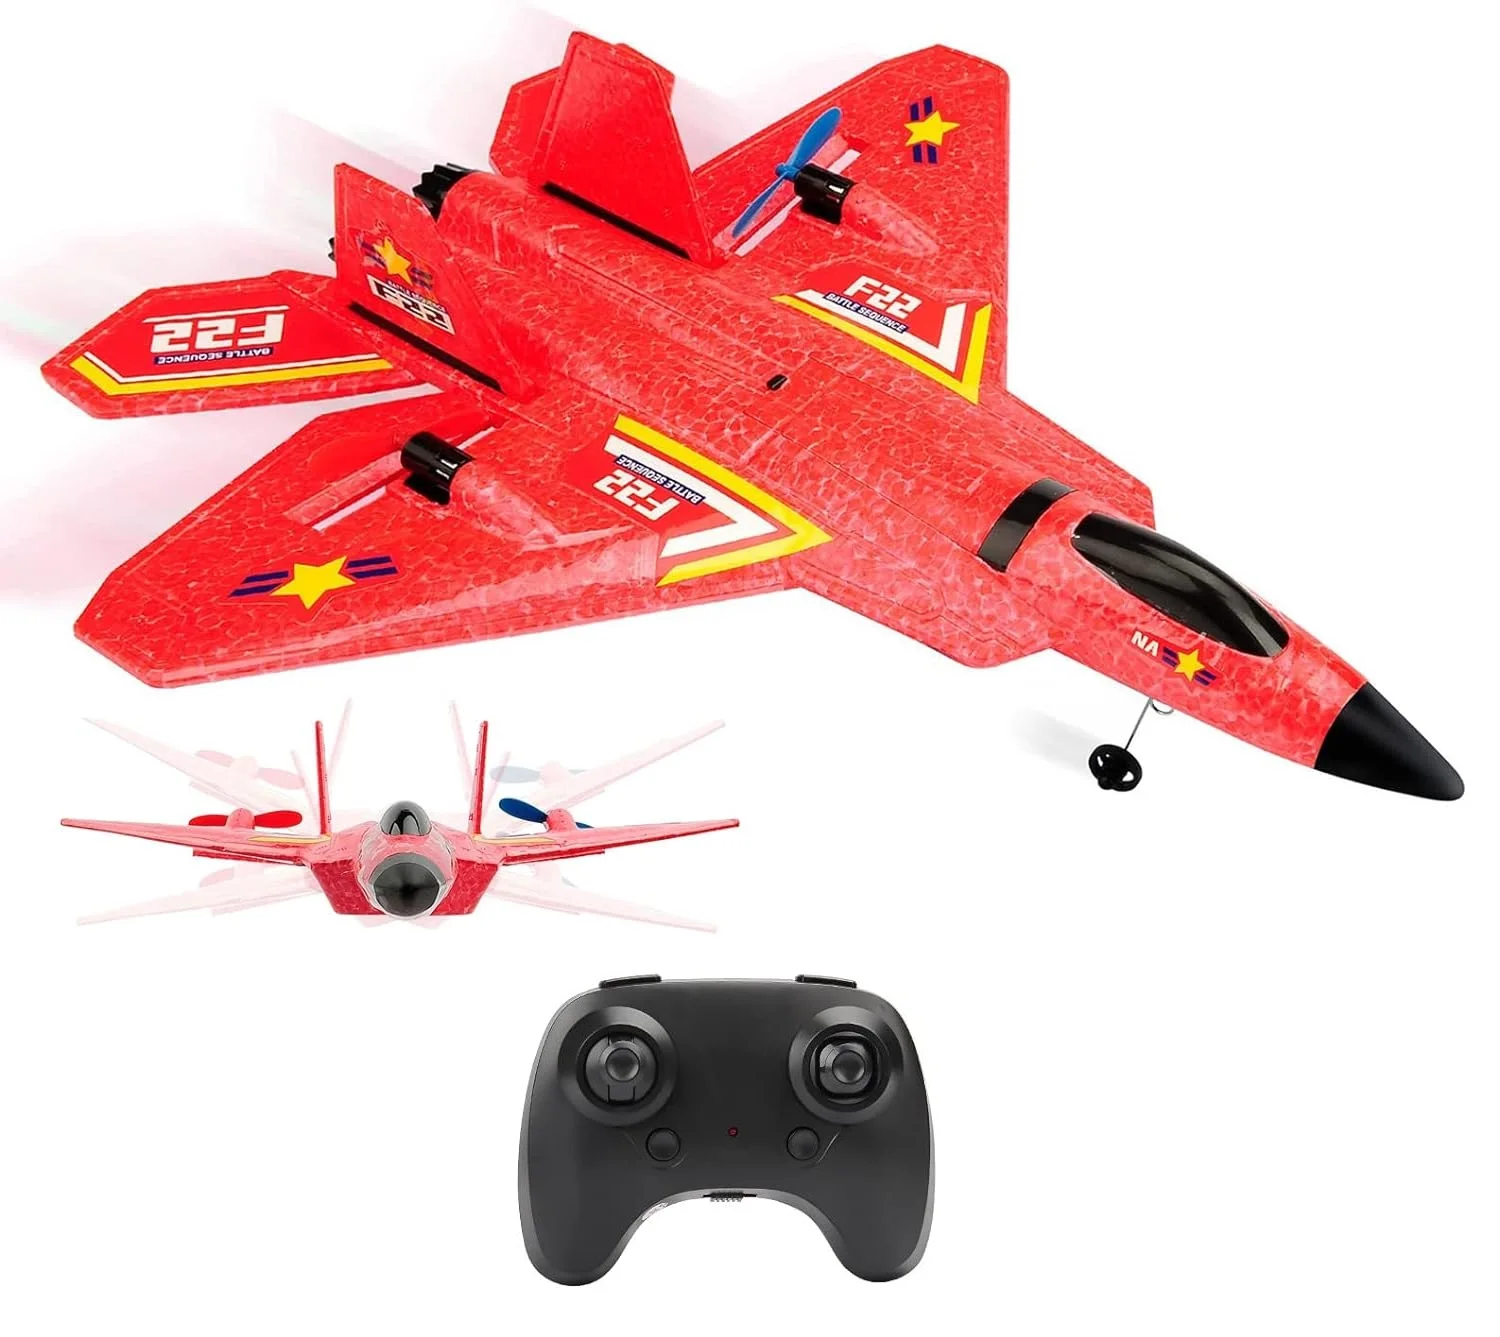 EPT RC Airplane Toy Night F22 RC Plane 2.4G Remote Control RC Glider Plane Outdoor Airplane Model Toys With LED Light